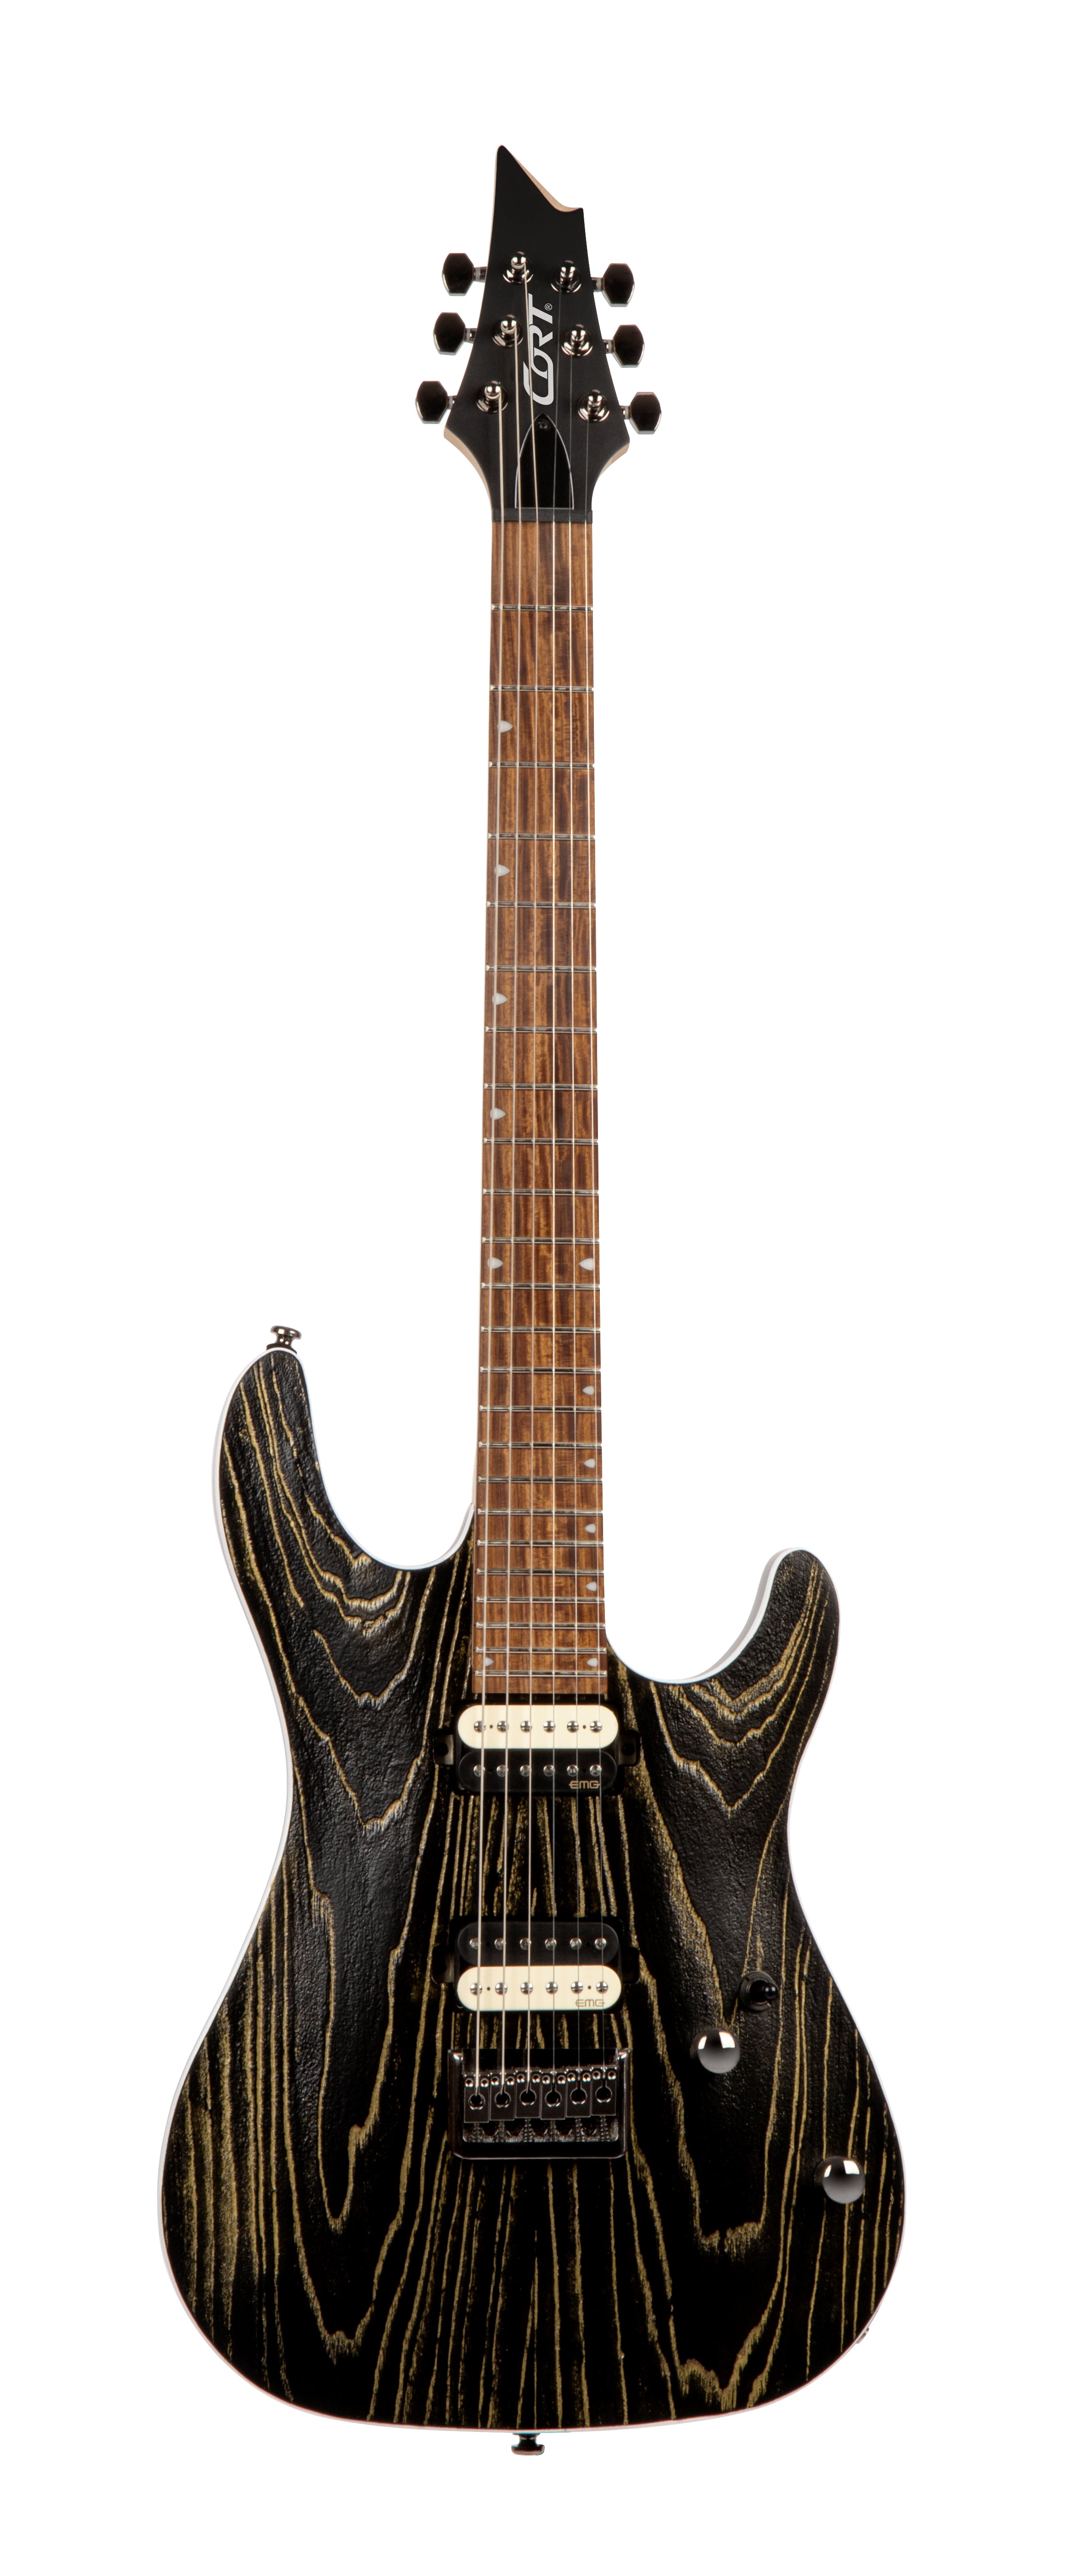 Cort KX300 Etched EBG, Electric Guitar for sale at Richards Guitars.